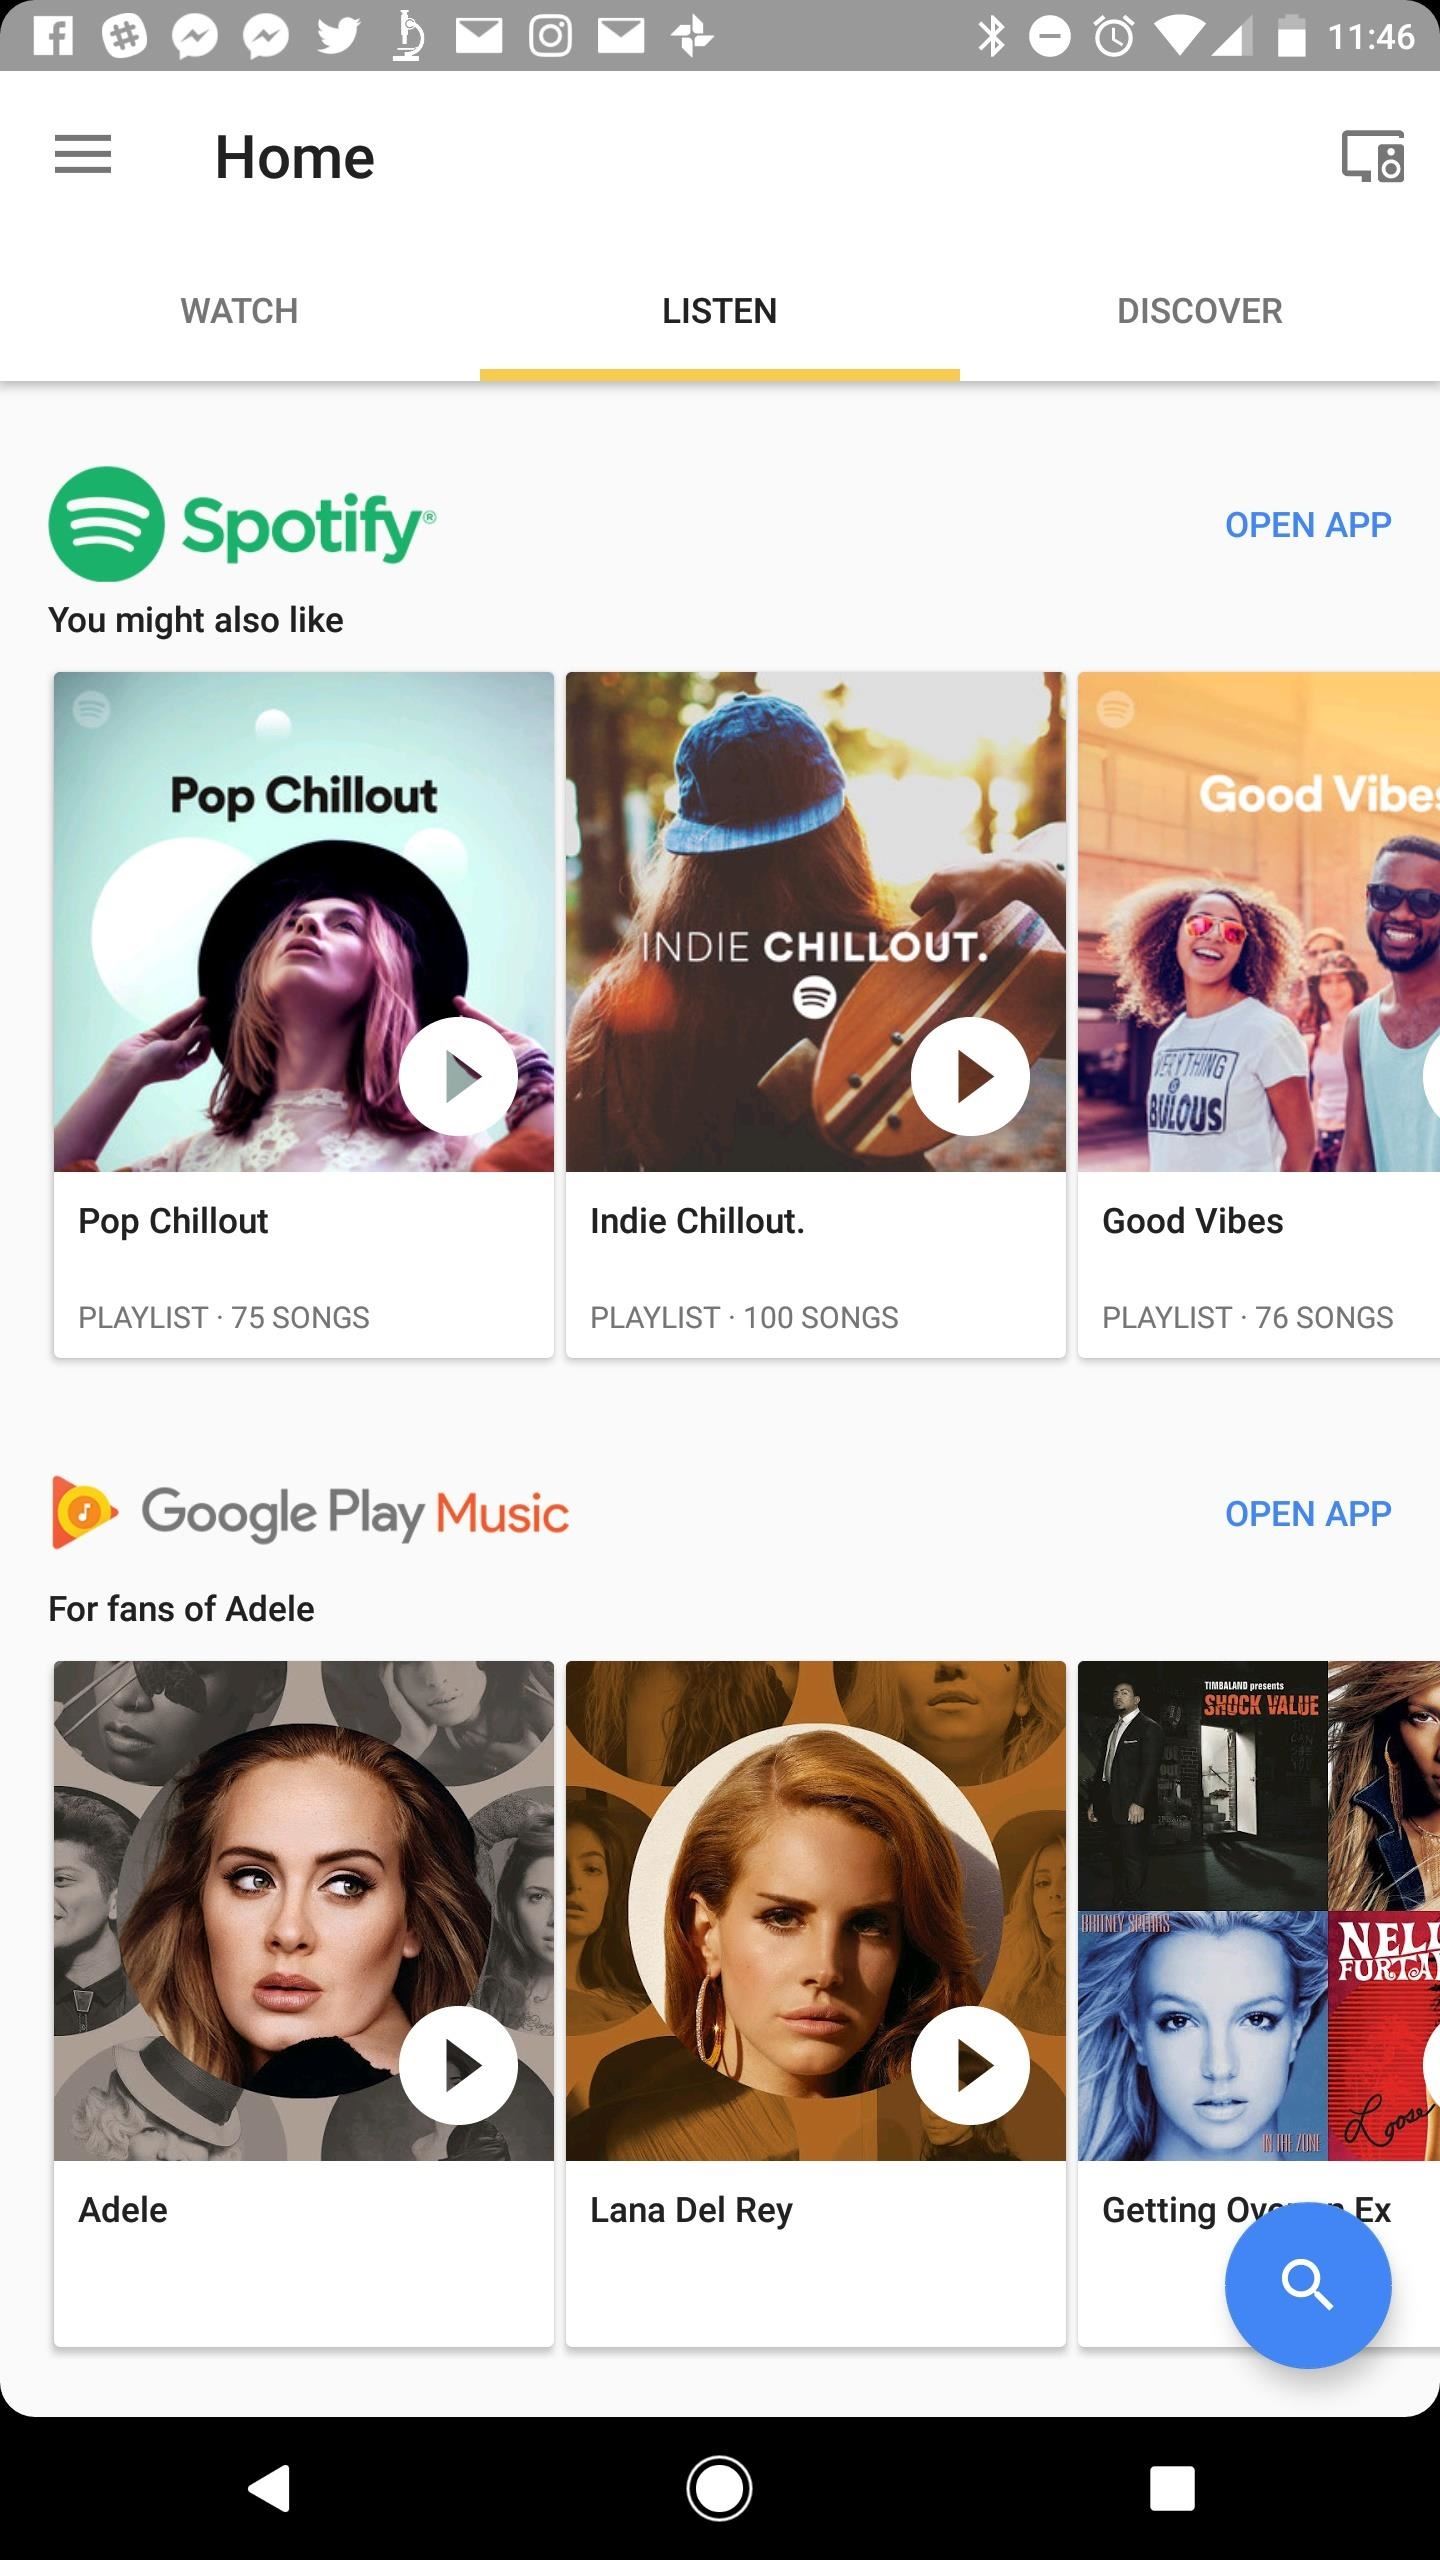 Google Home's New 'Listen' Tab Makes It Easy to Discover Music You'll Love